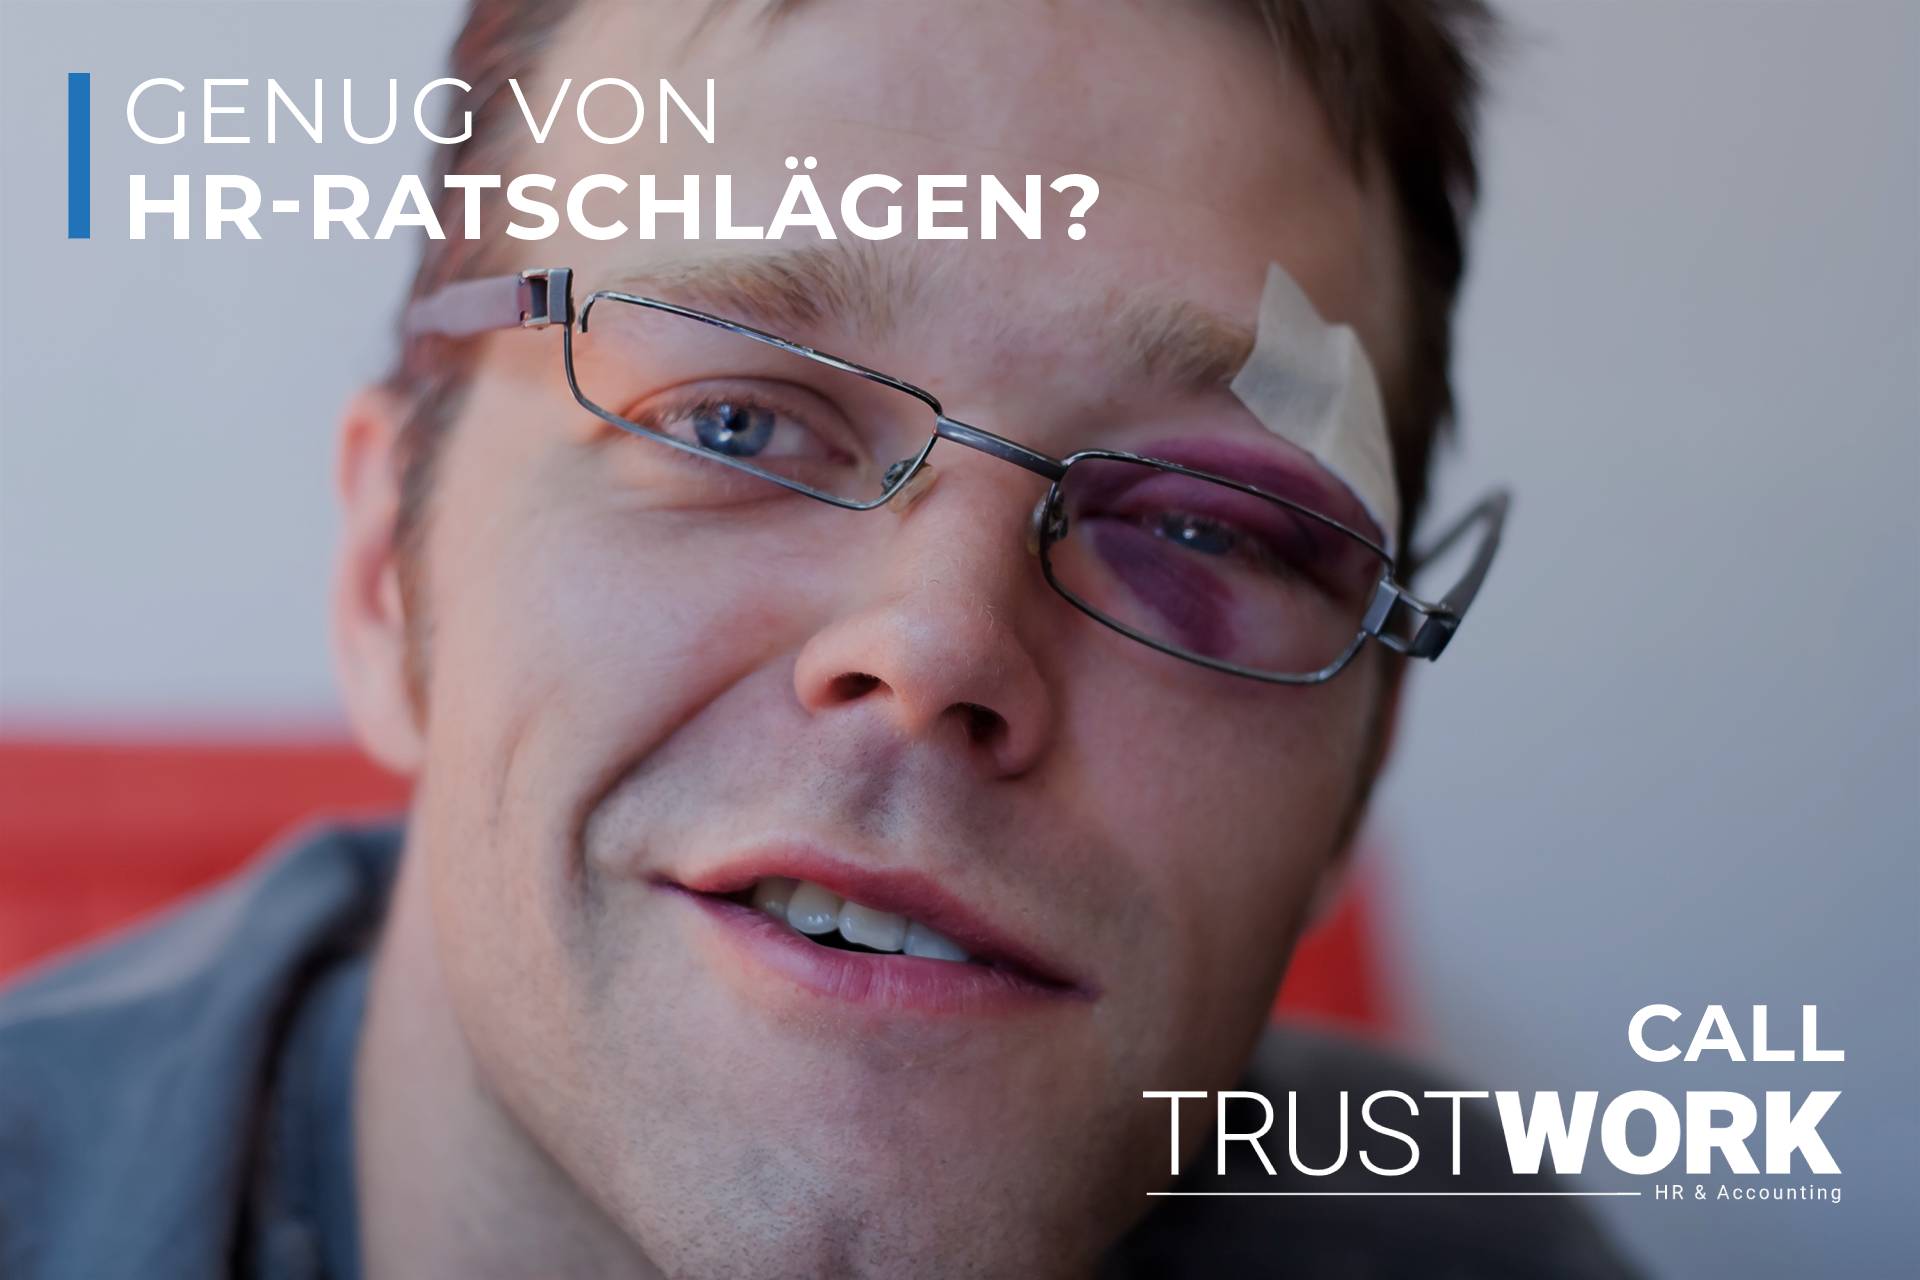 HR Outsourcing &#038; Solutions, Trust Work - Treuhand und HR Outsourcing